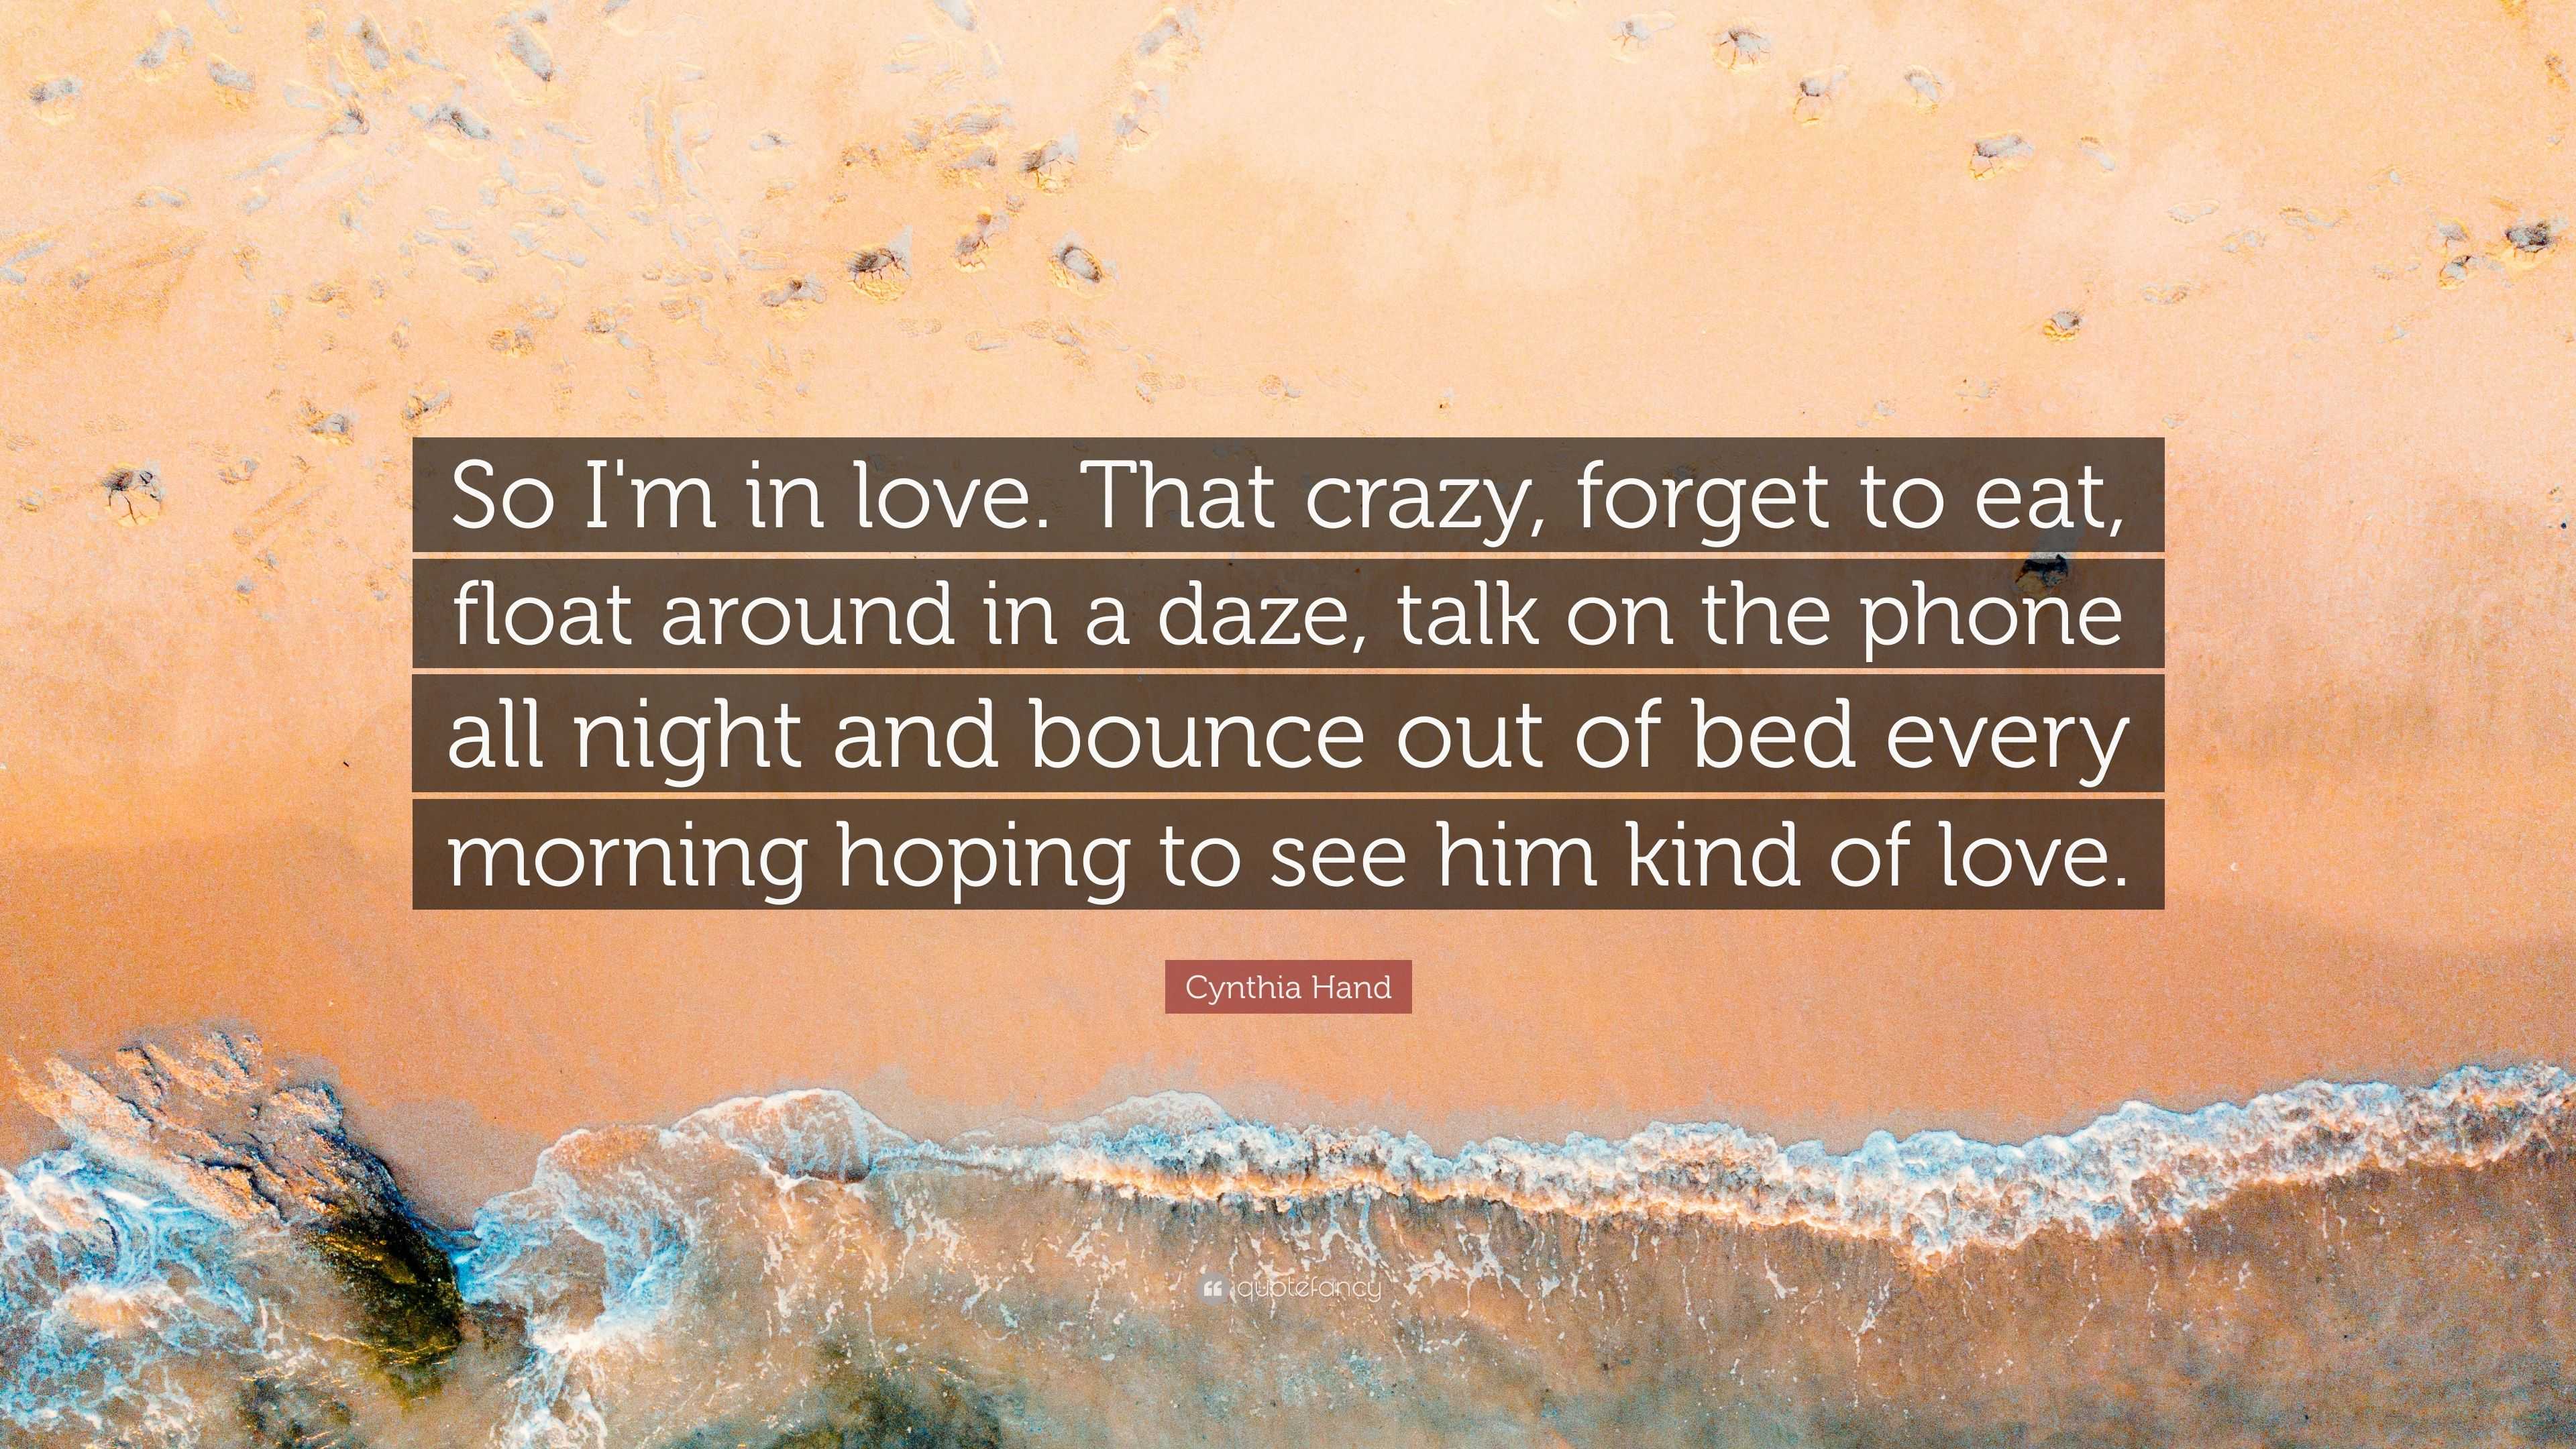 Crazy In Love: An Unhealthy Love Dependency, by The Bottom Line with Tray